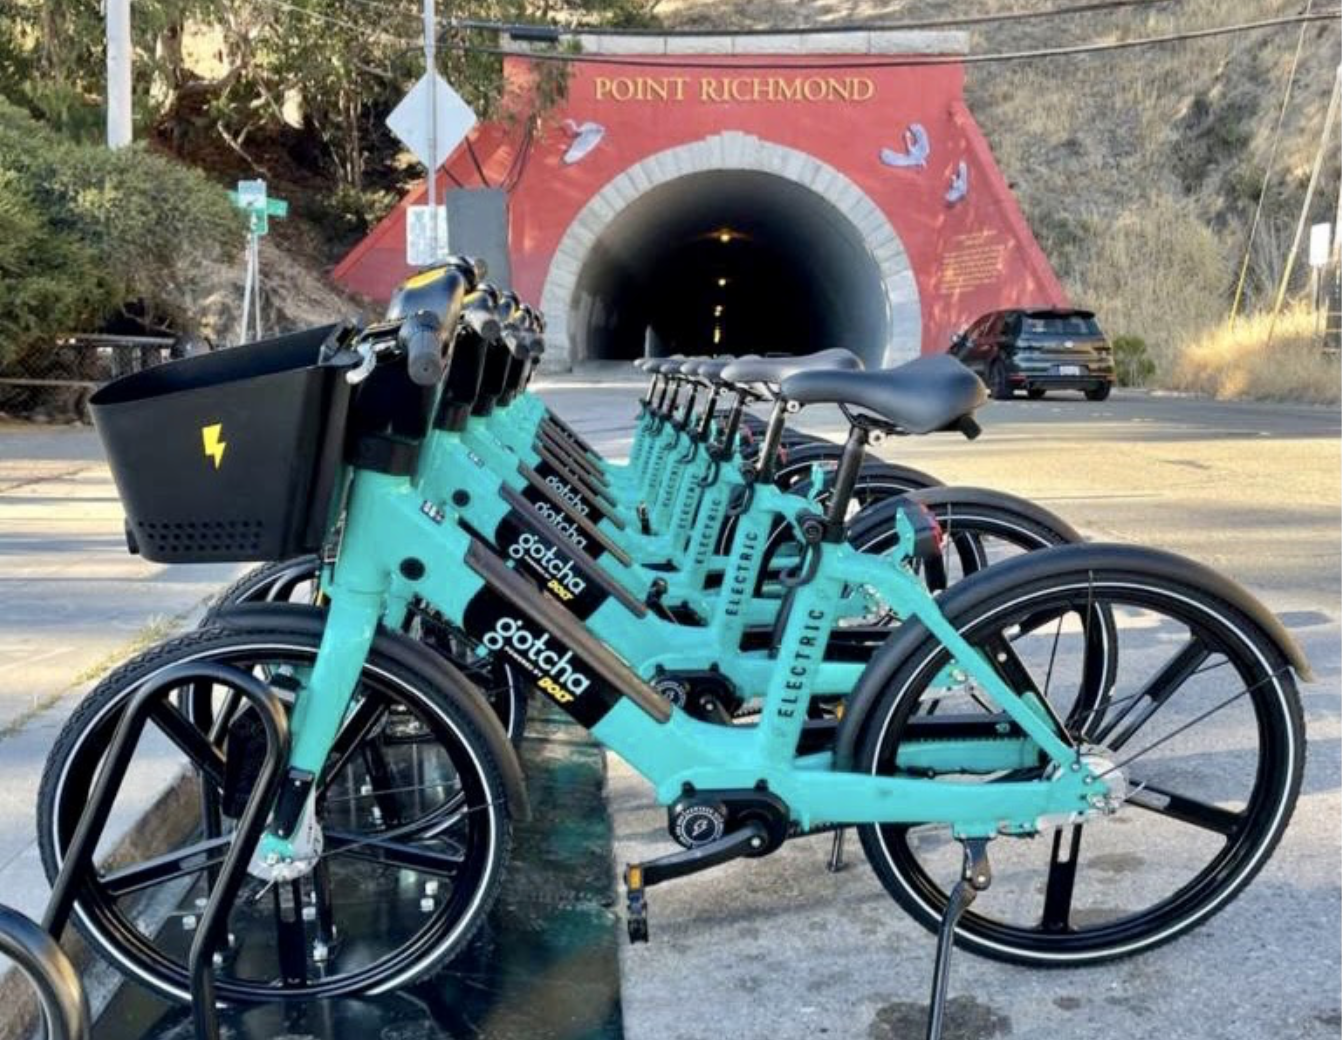 teal-colored e-bikes lined up in richmond, ca